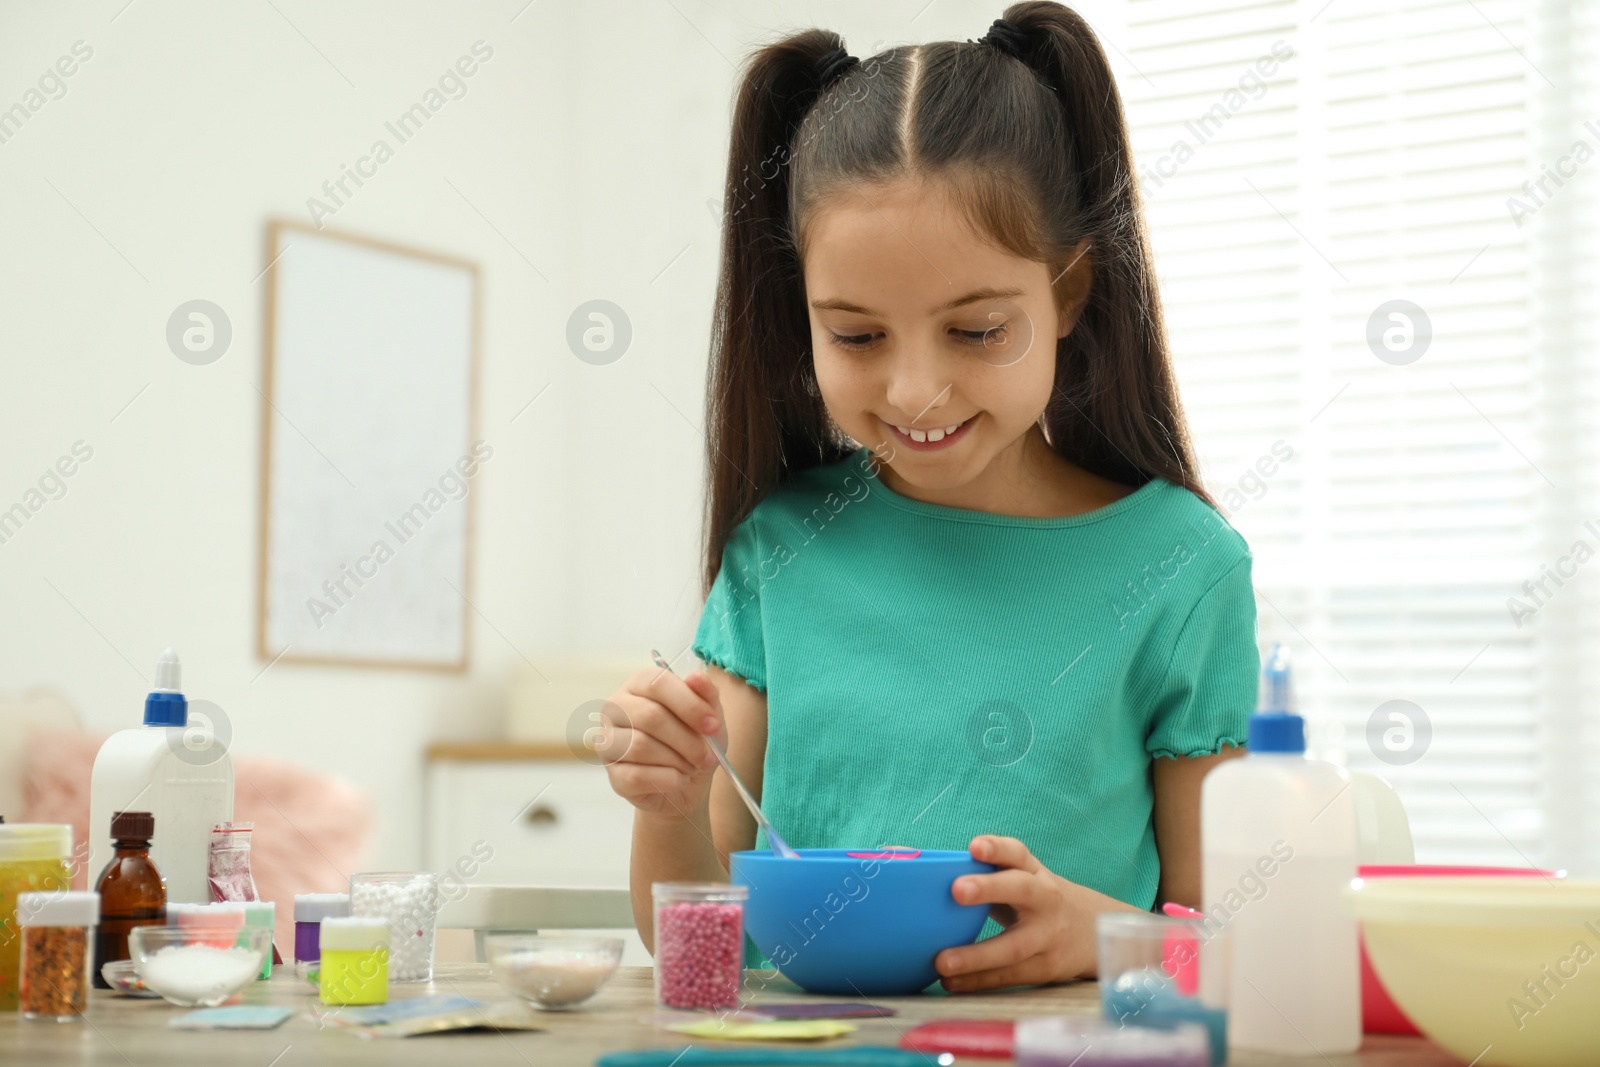 Photo of Cute little girl mixing ingredients with silicone spatula at table in room. DIY slime toy